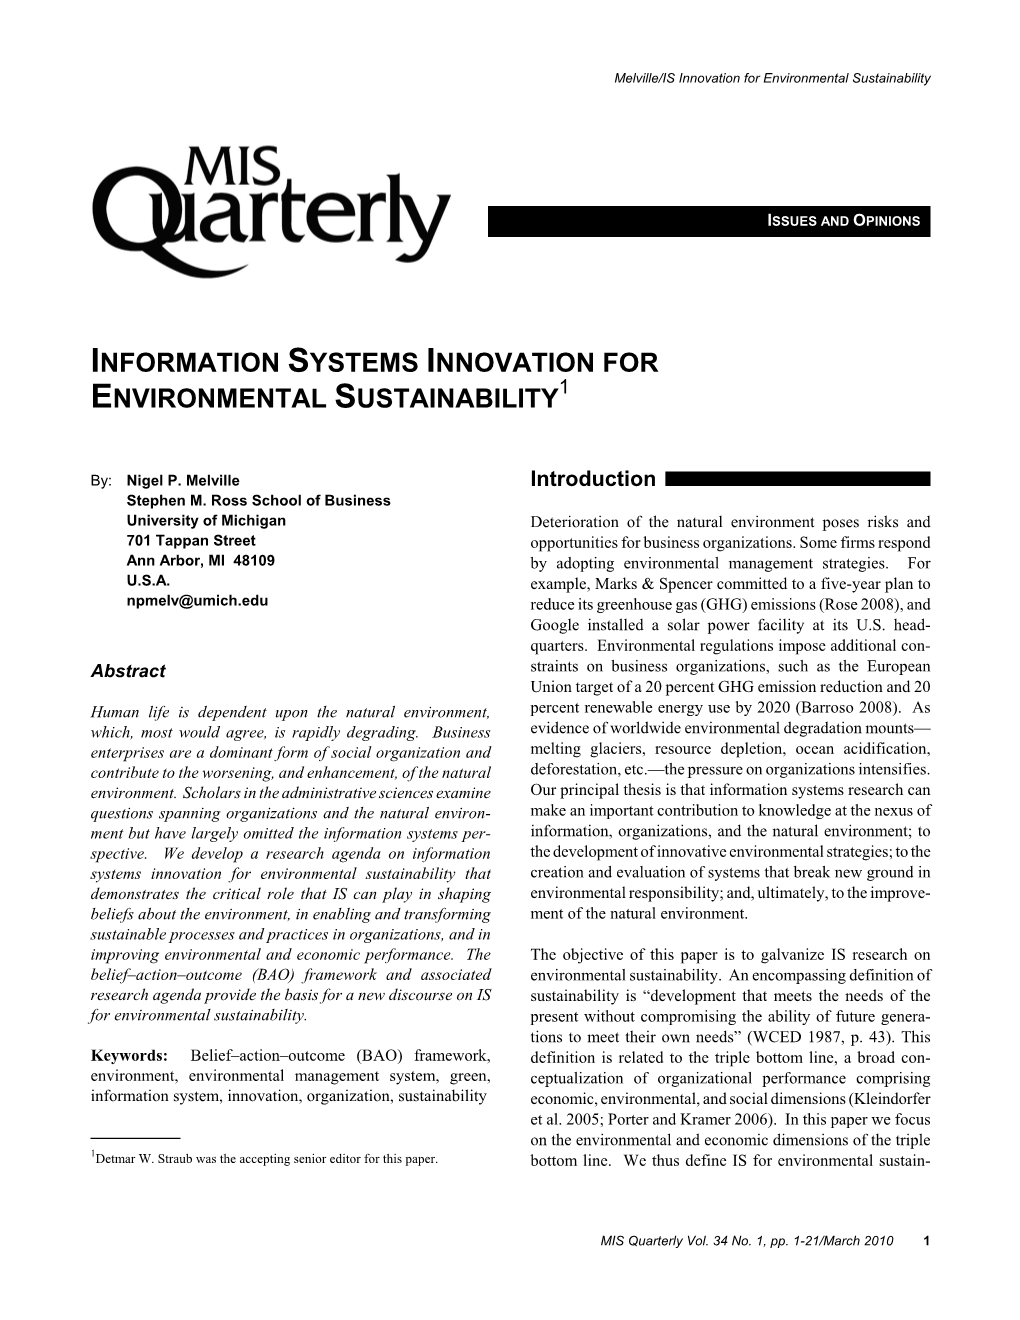 Information Systems Innovation for Environmental Sustainability1